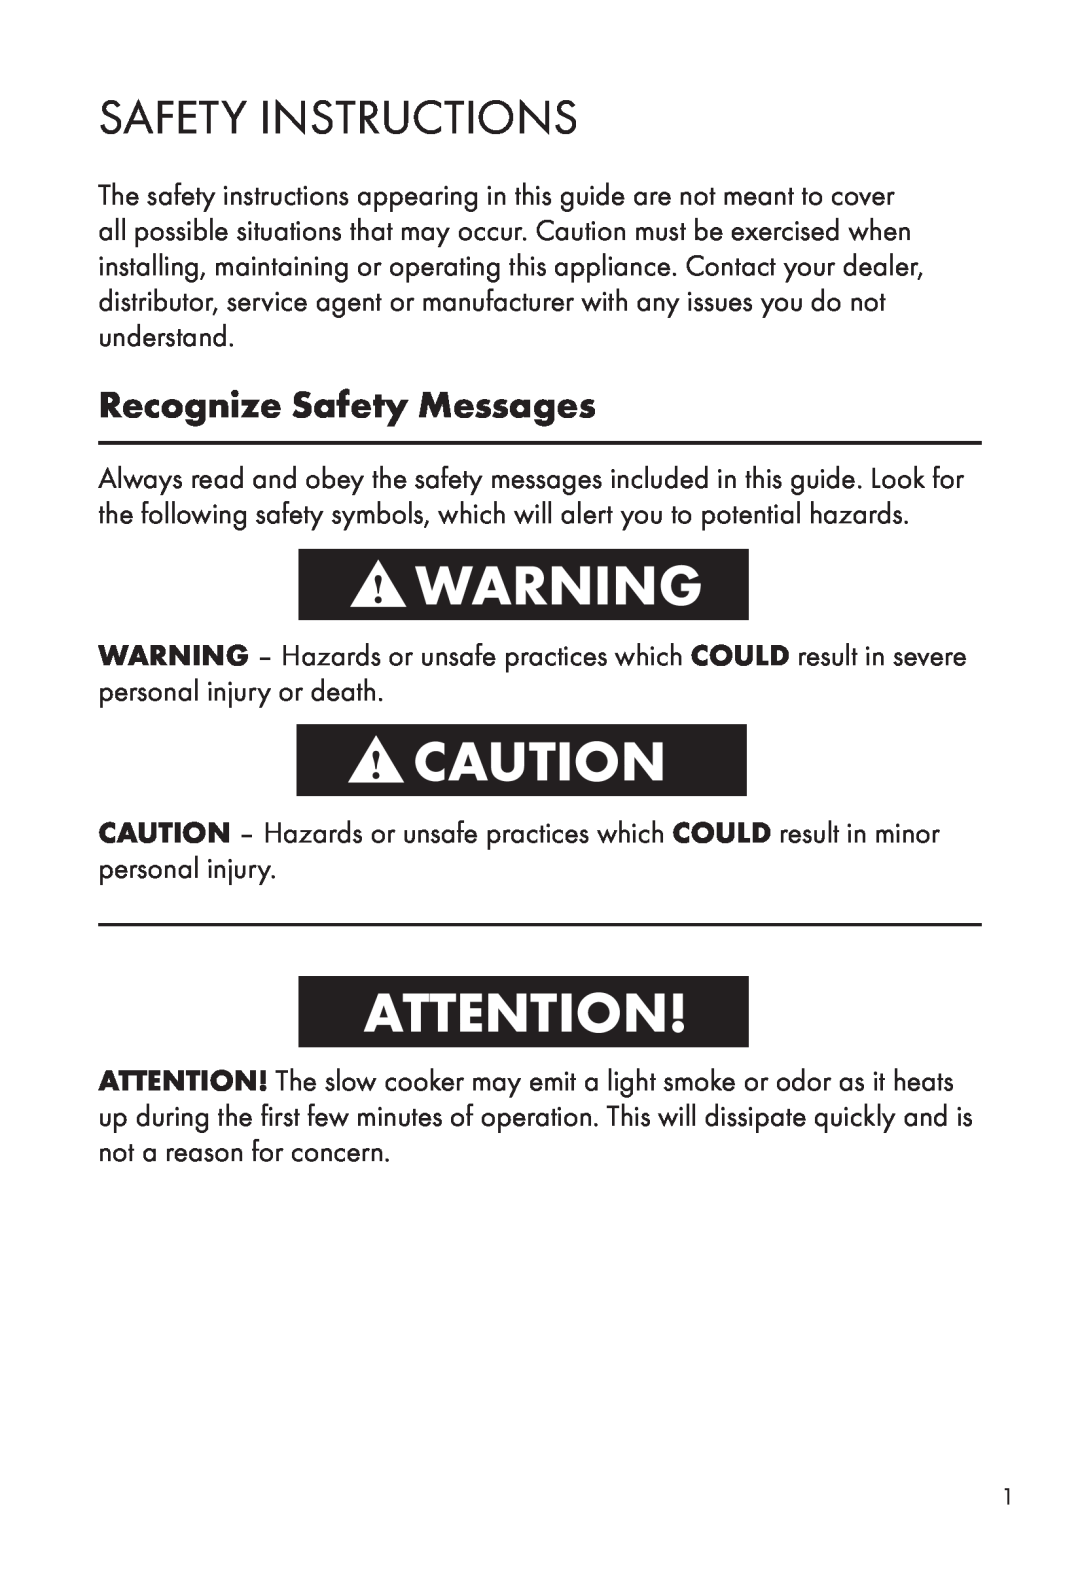 Calphalon HE400SC manual Safety Instructions, Recognize Safety Messages 